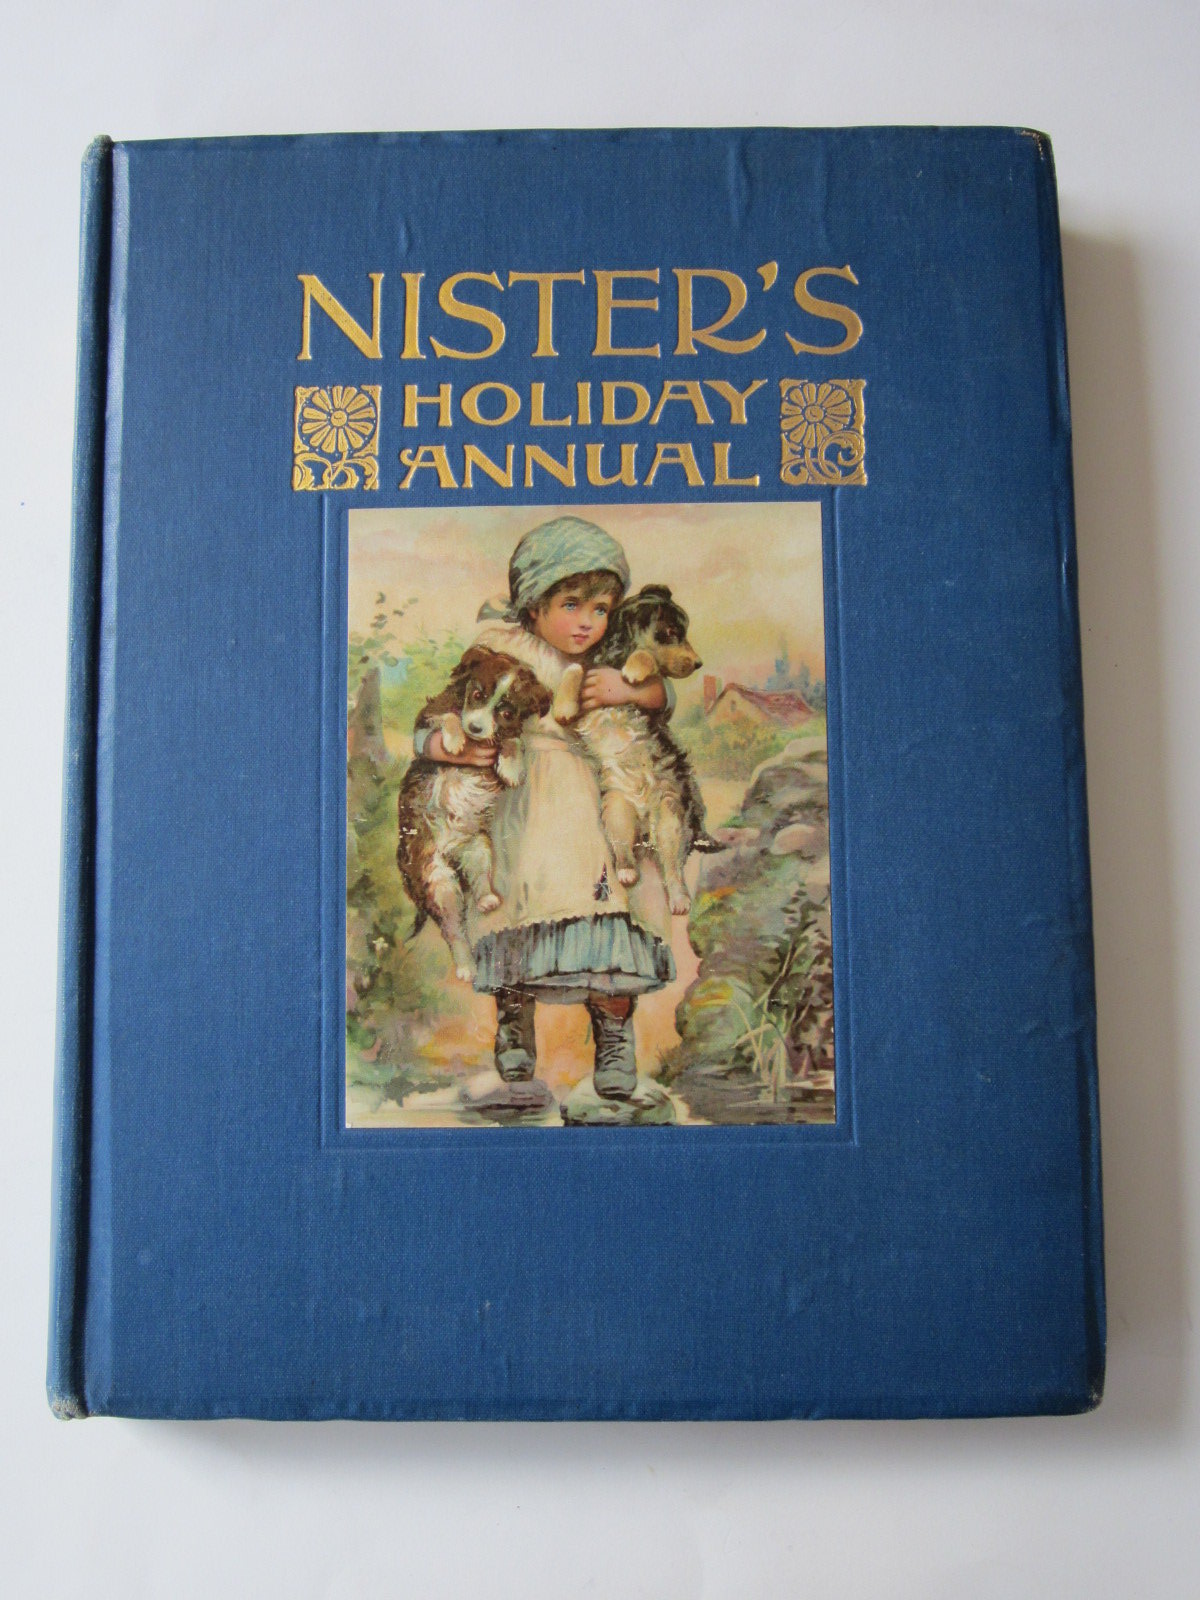 Photo of NISTER'S HOLIDAY ANNUAL - 25TH YEAR written by Playne, Alfred C. Everett-Green, Evelyn Bingham, Clifton et al,  illustrated by Petherick, Rosa C. Hardy, E. Stuart Robinson, Gordon et al.,  published by Ernest Nister (STOCK CODE: 1307930)  for sale by Stella & Rose's Books